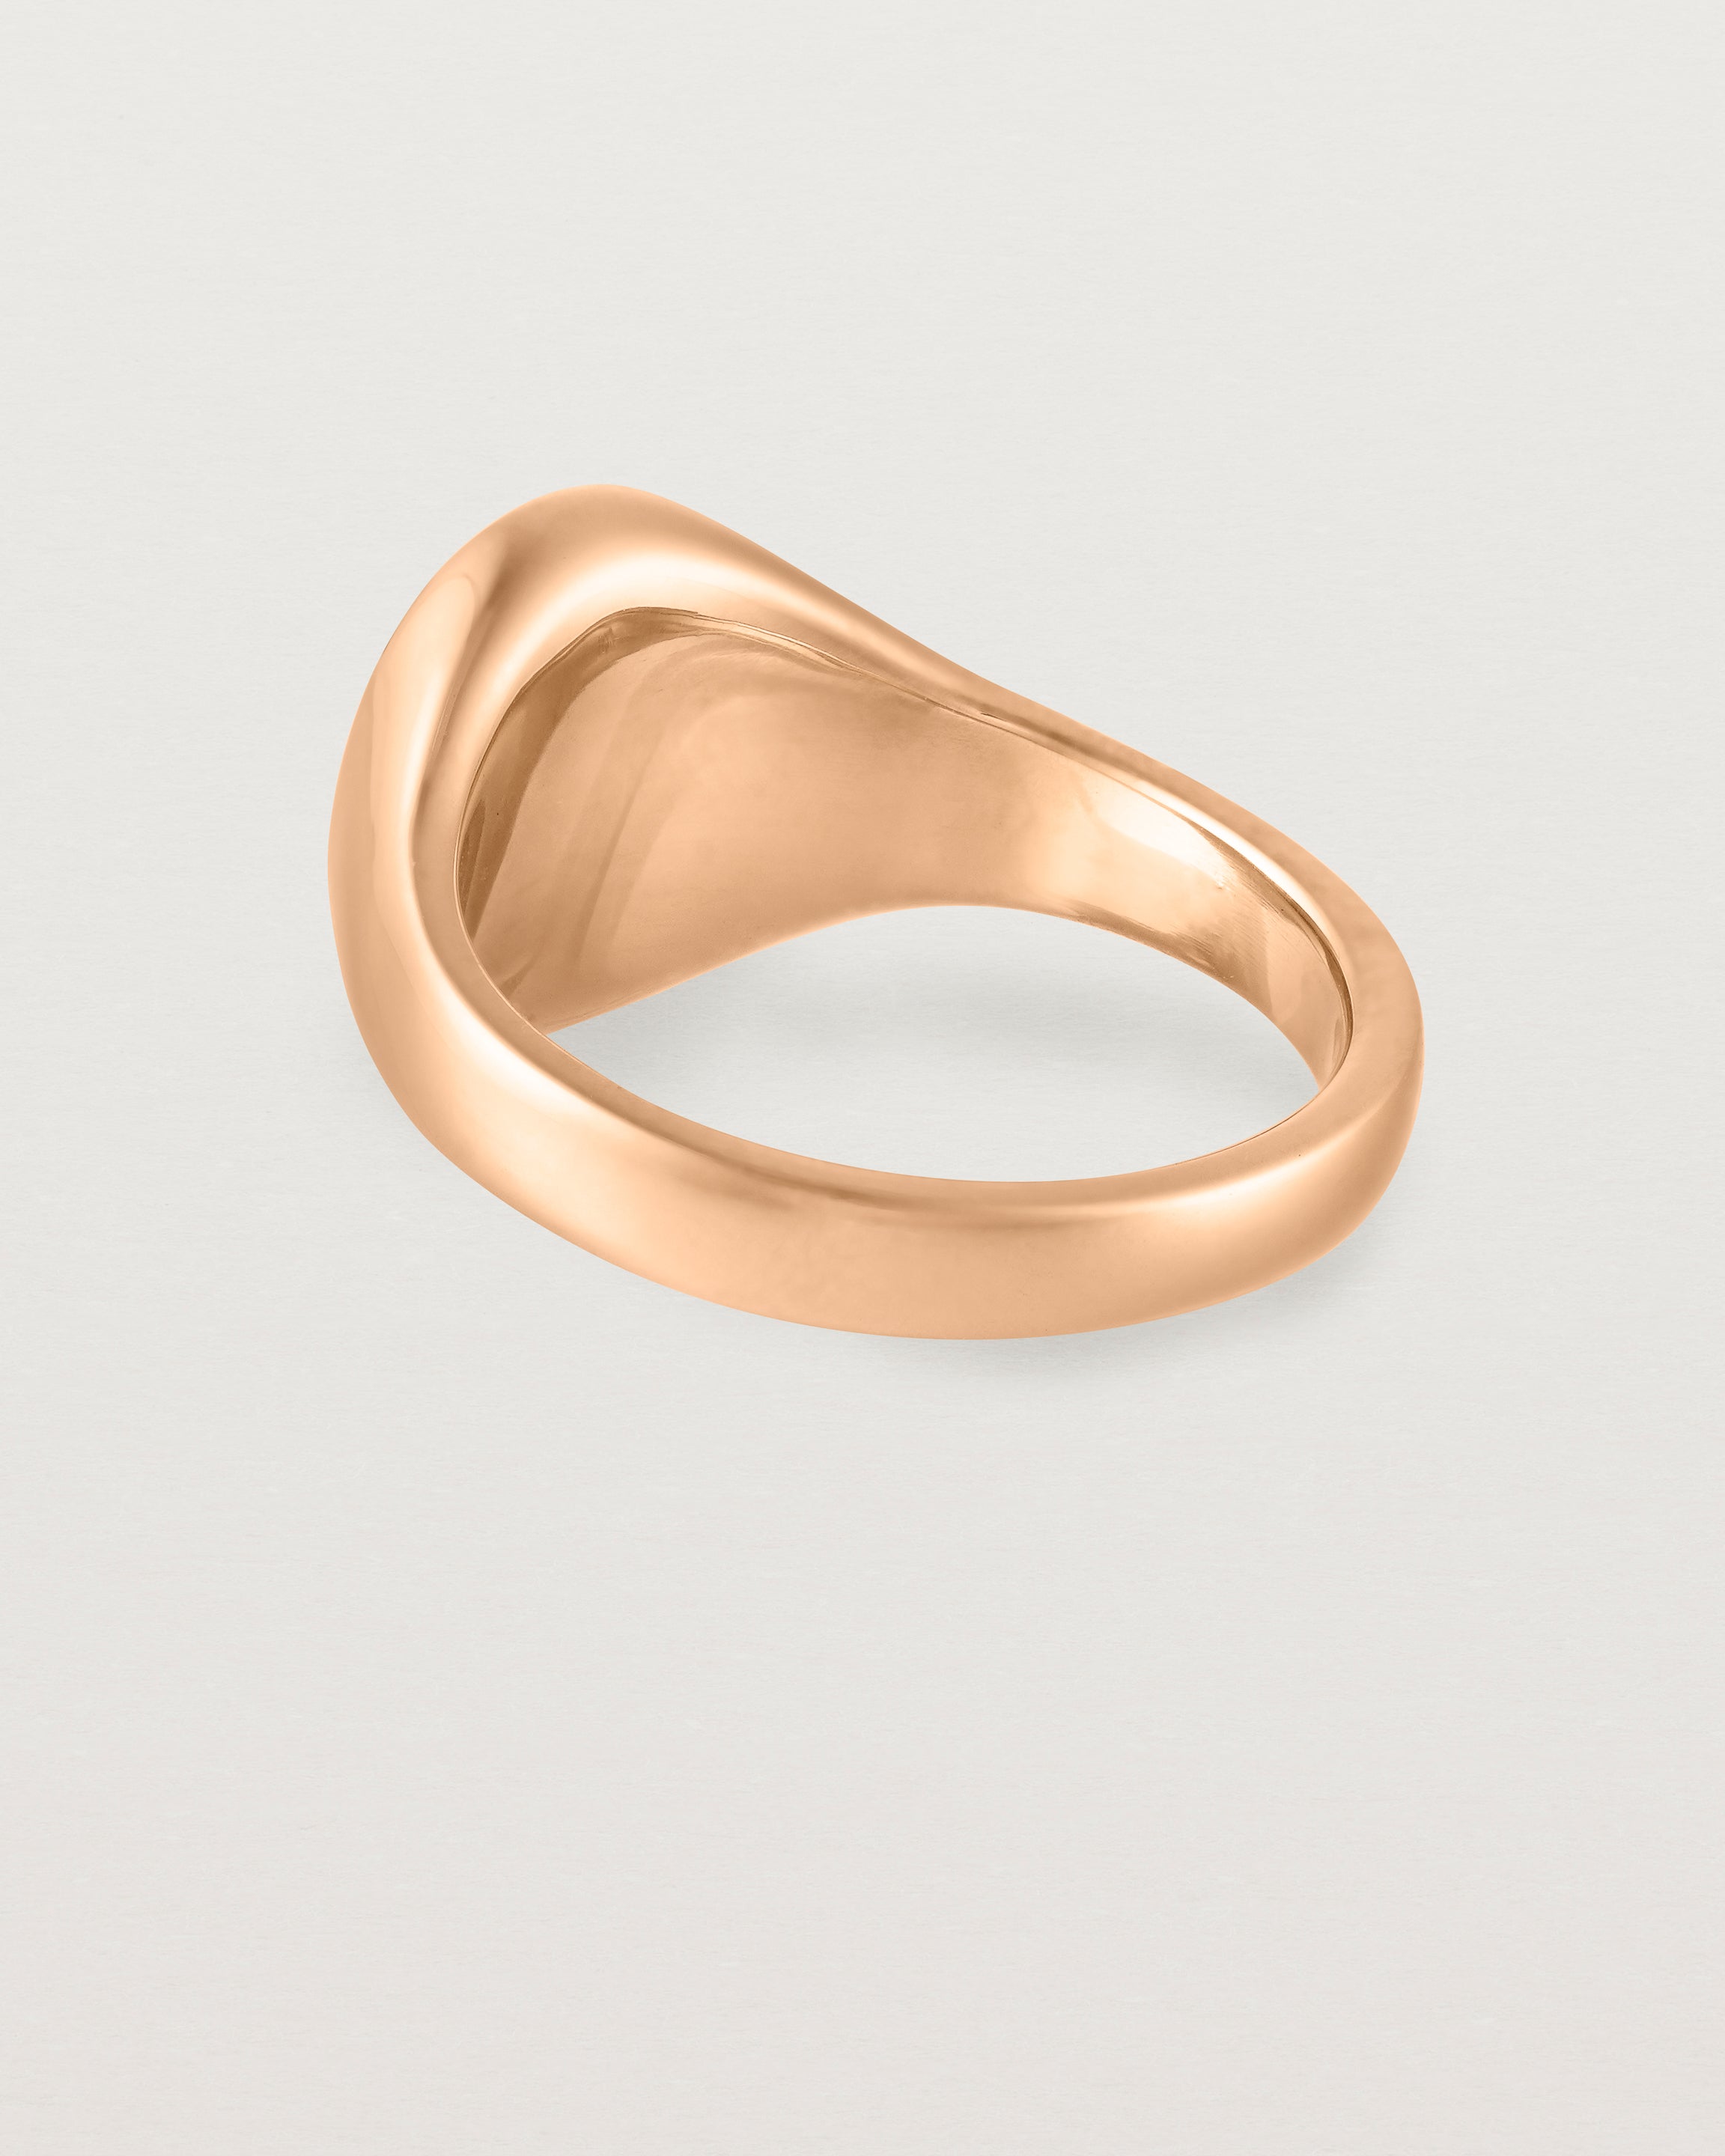 Back view of the Arden Signet Ring in Rose Gold.